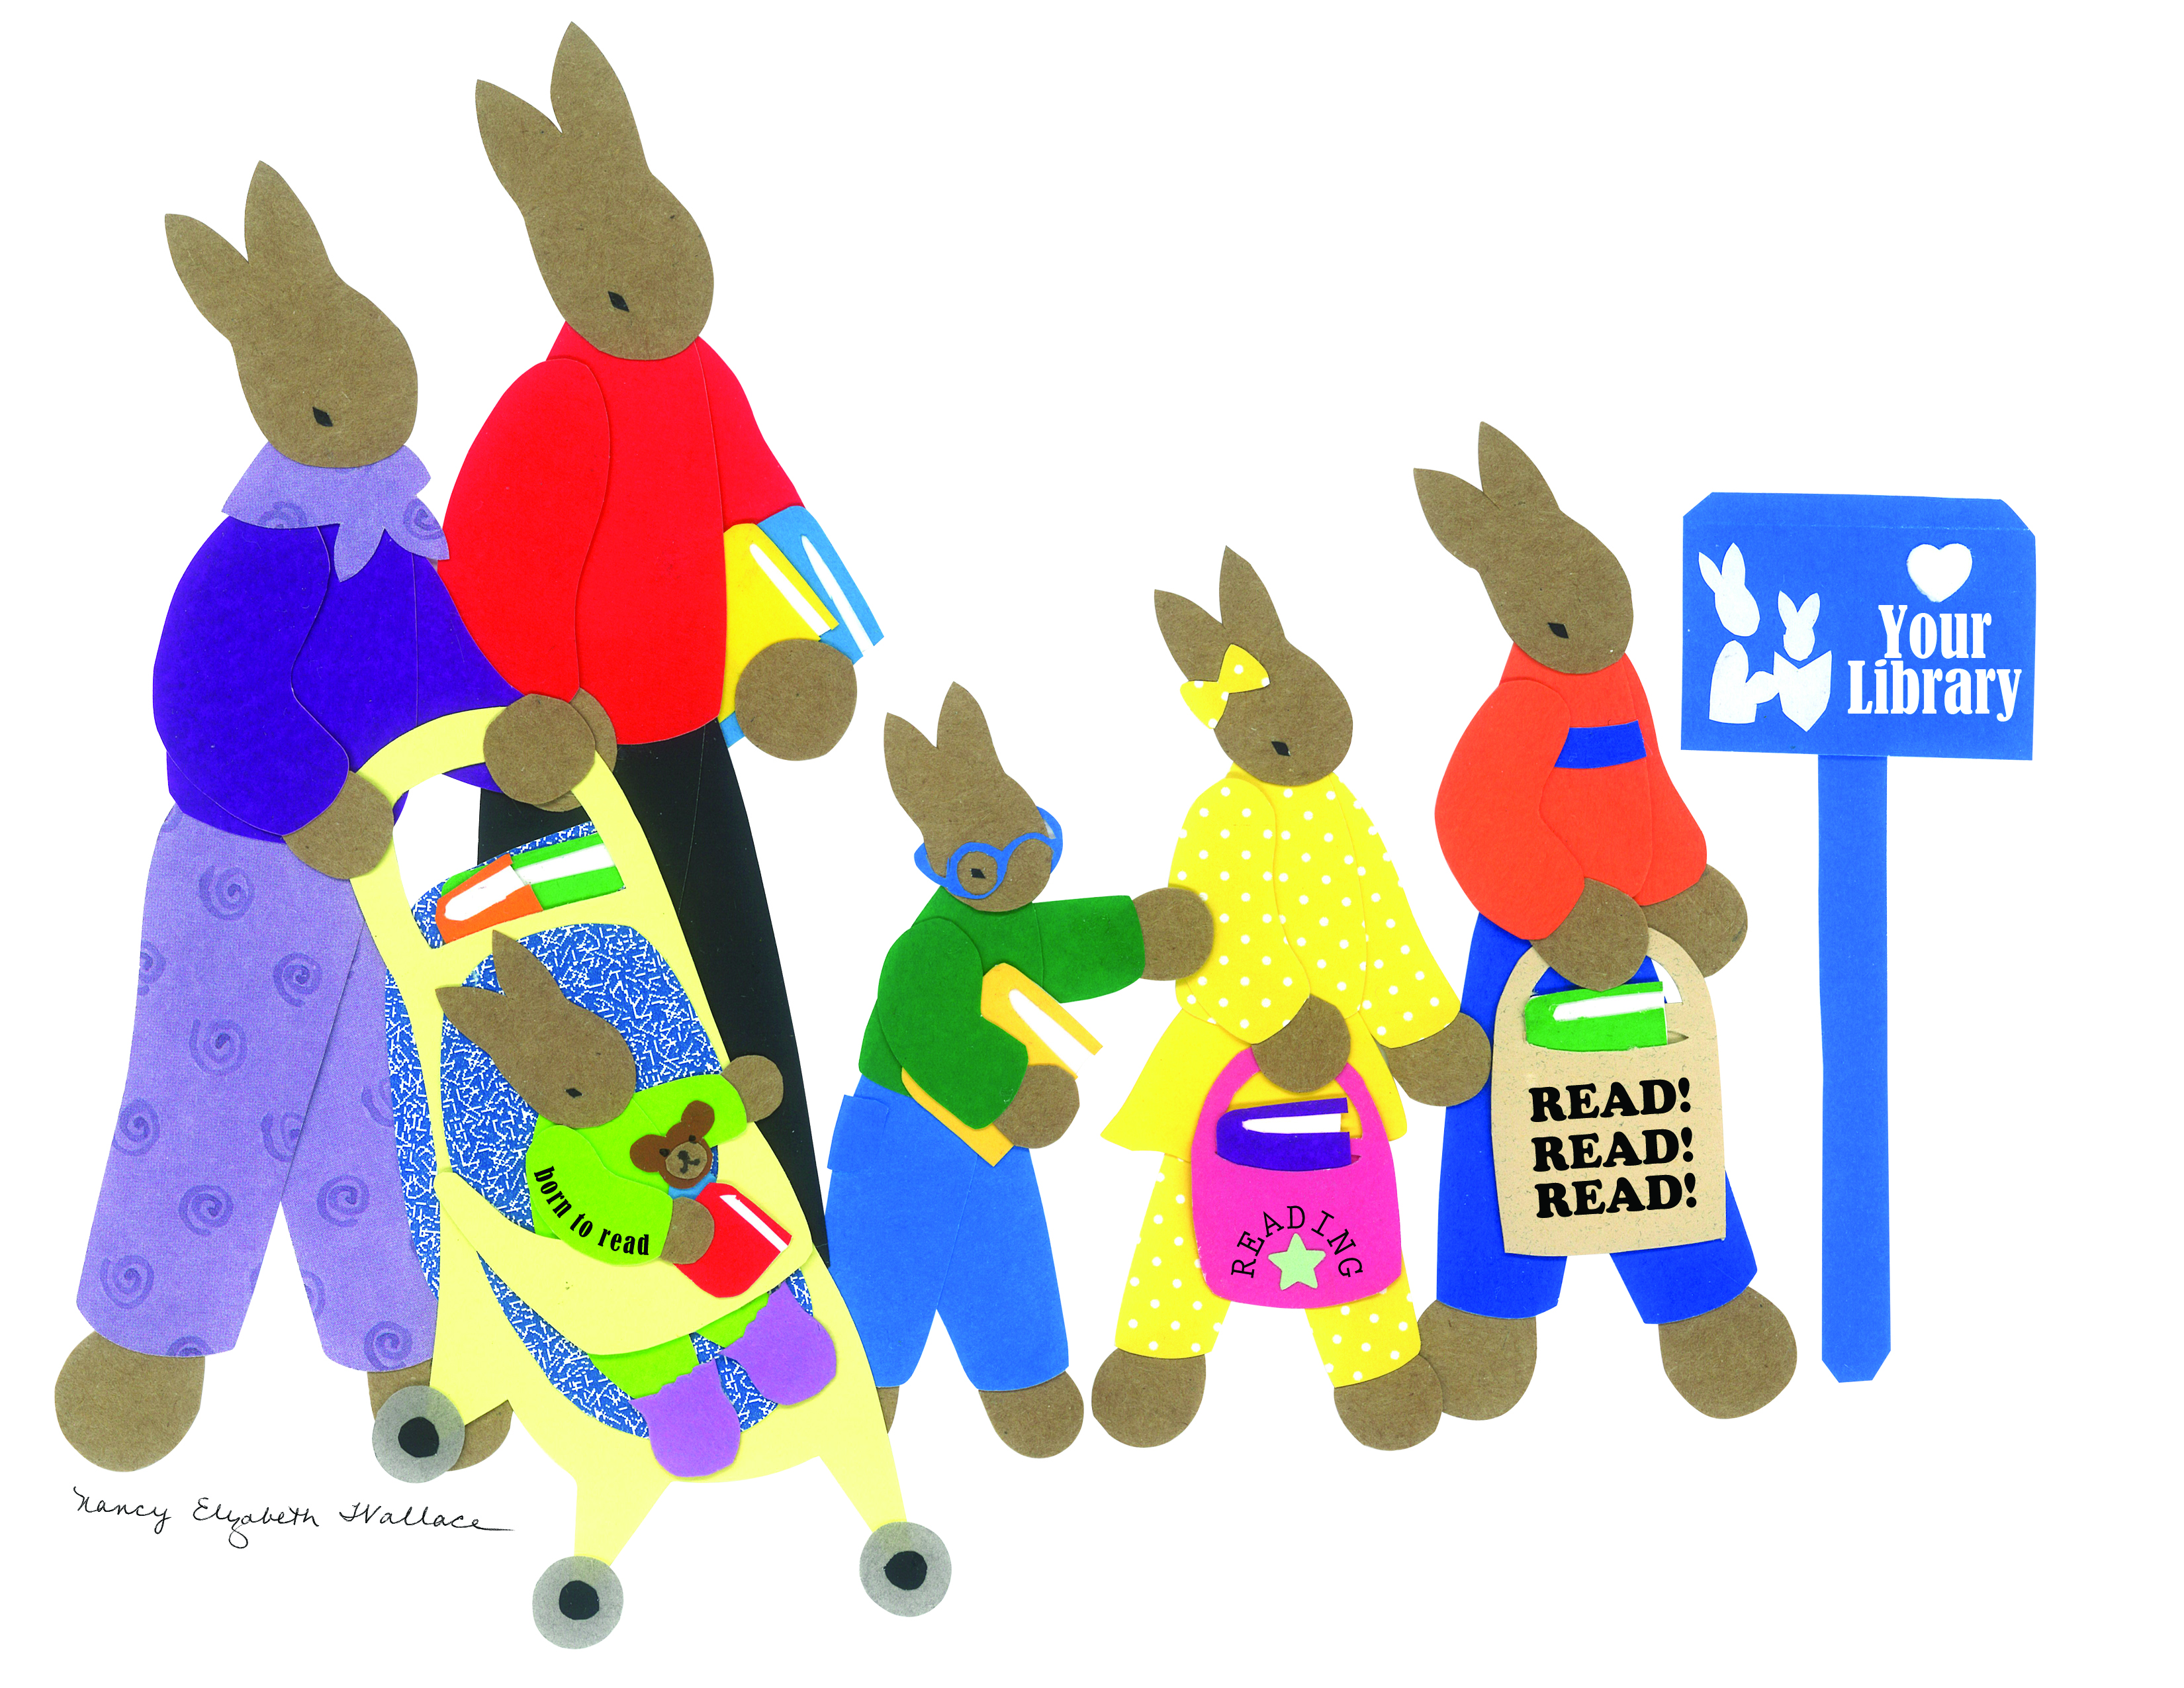 A family of rabbits going to the library.